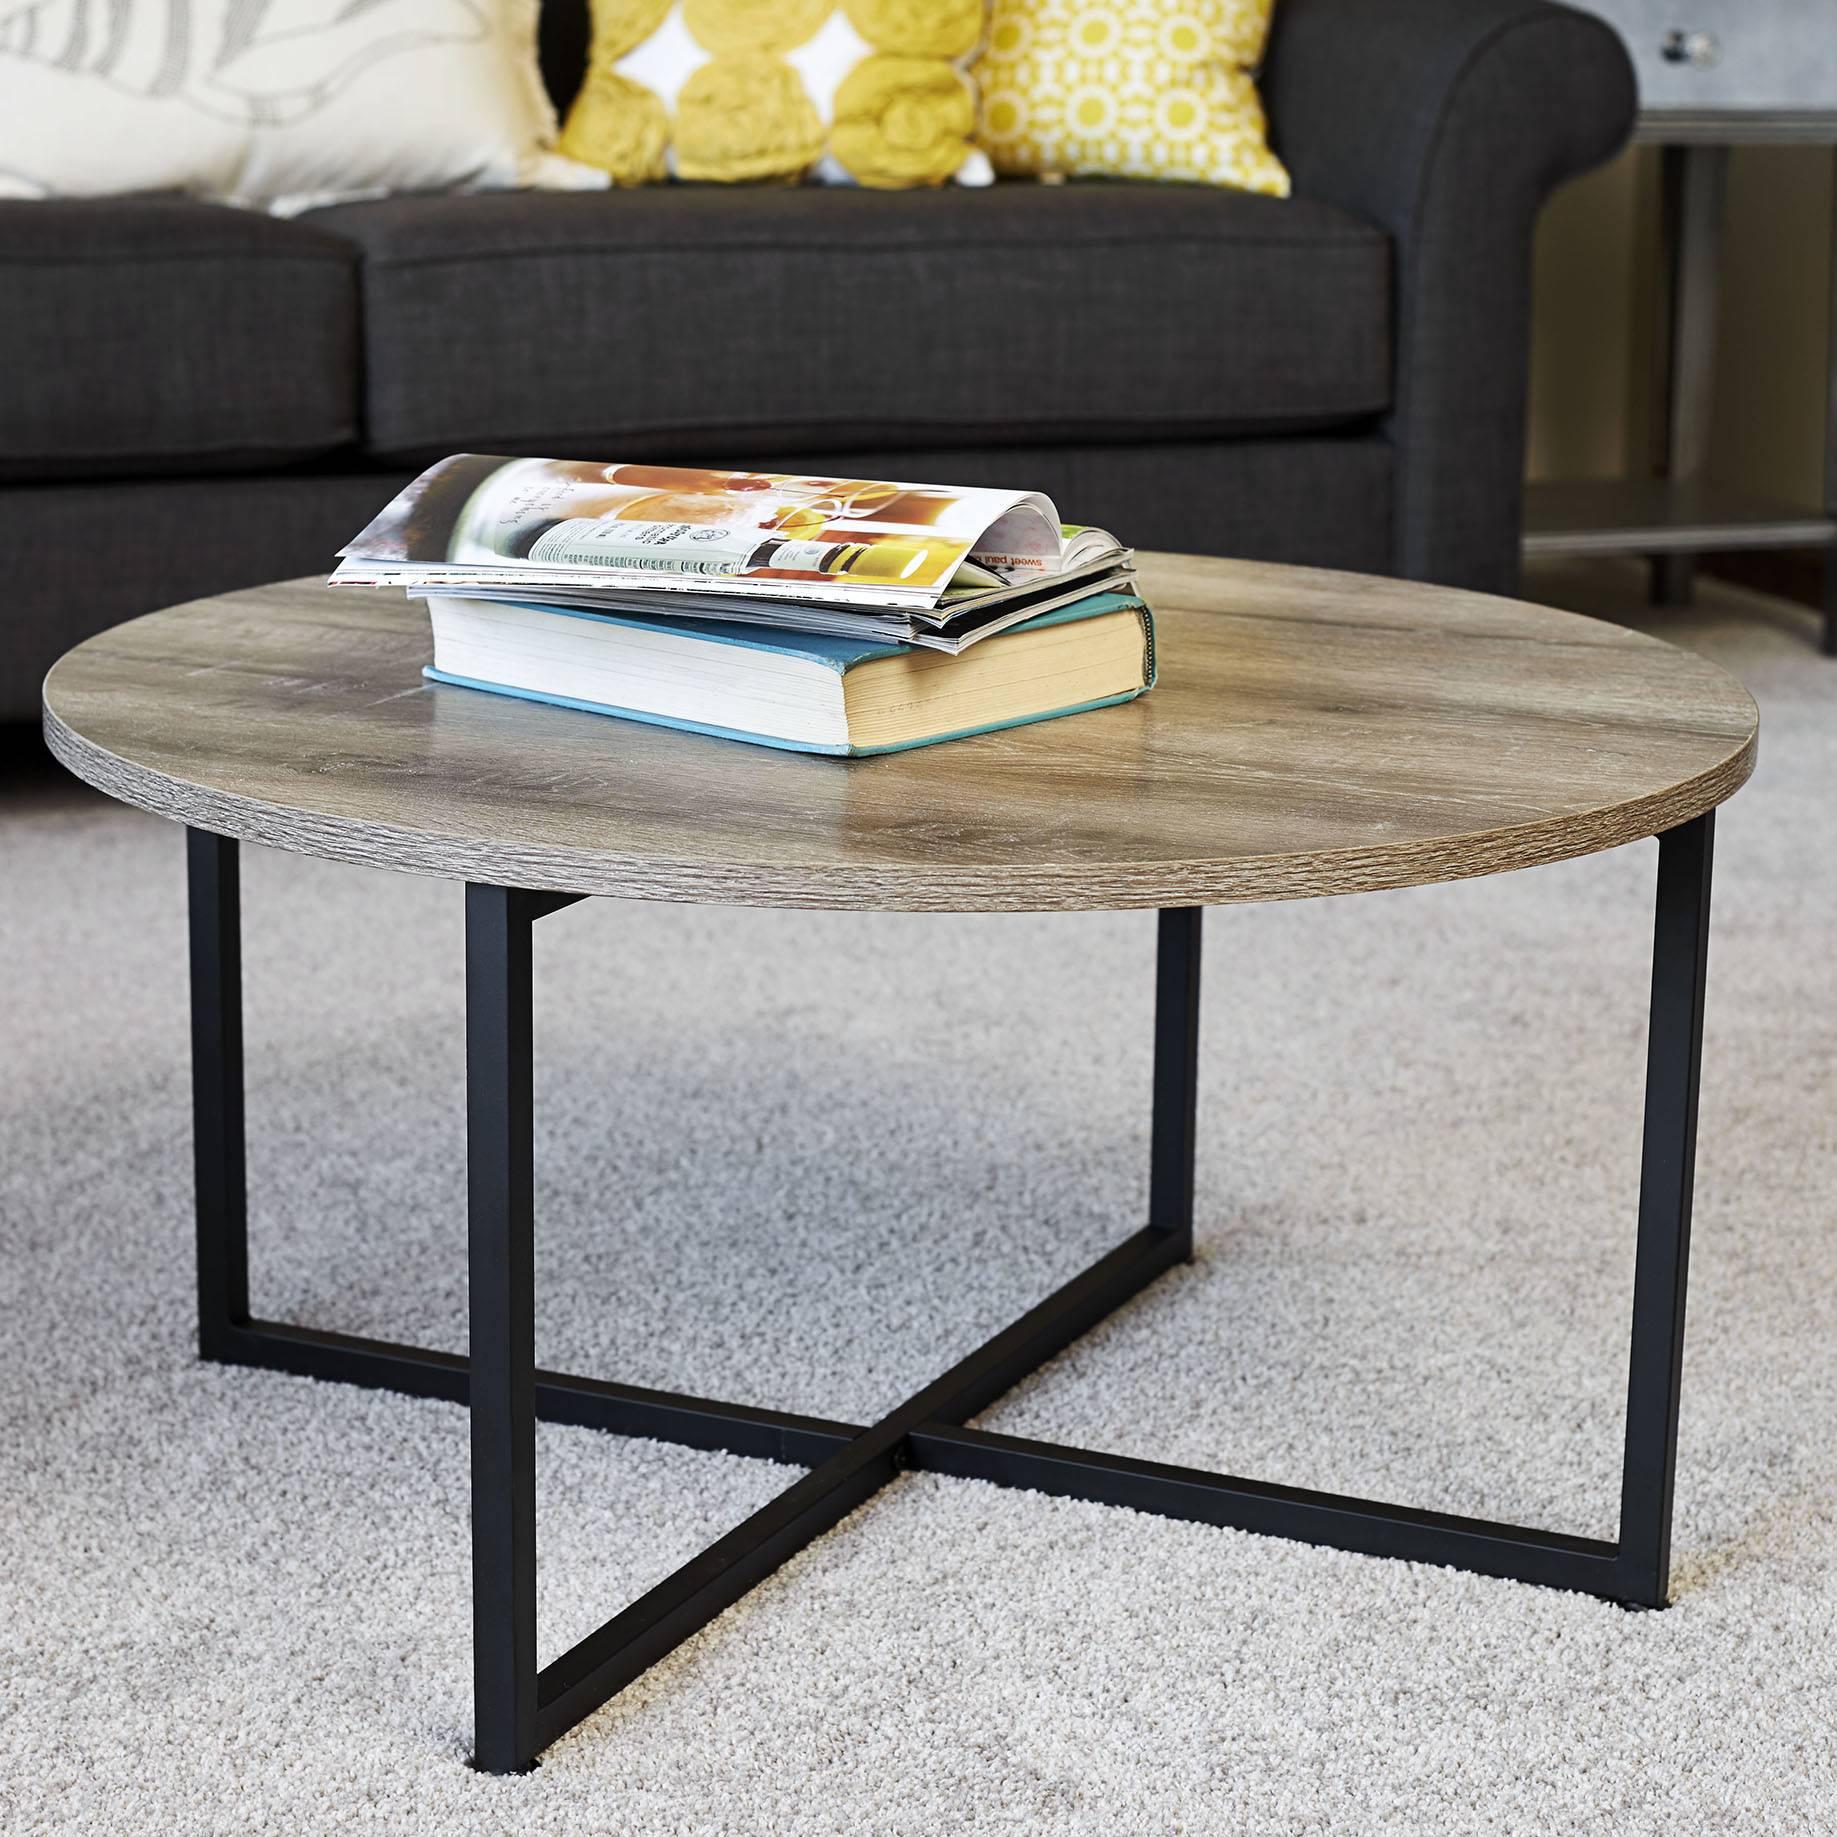 MegaRoundup: 10 Online Sources for Coffee Tables Under $150